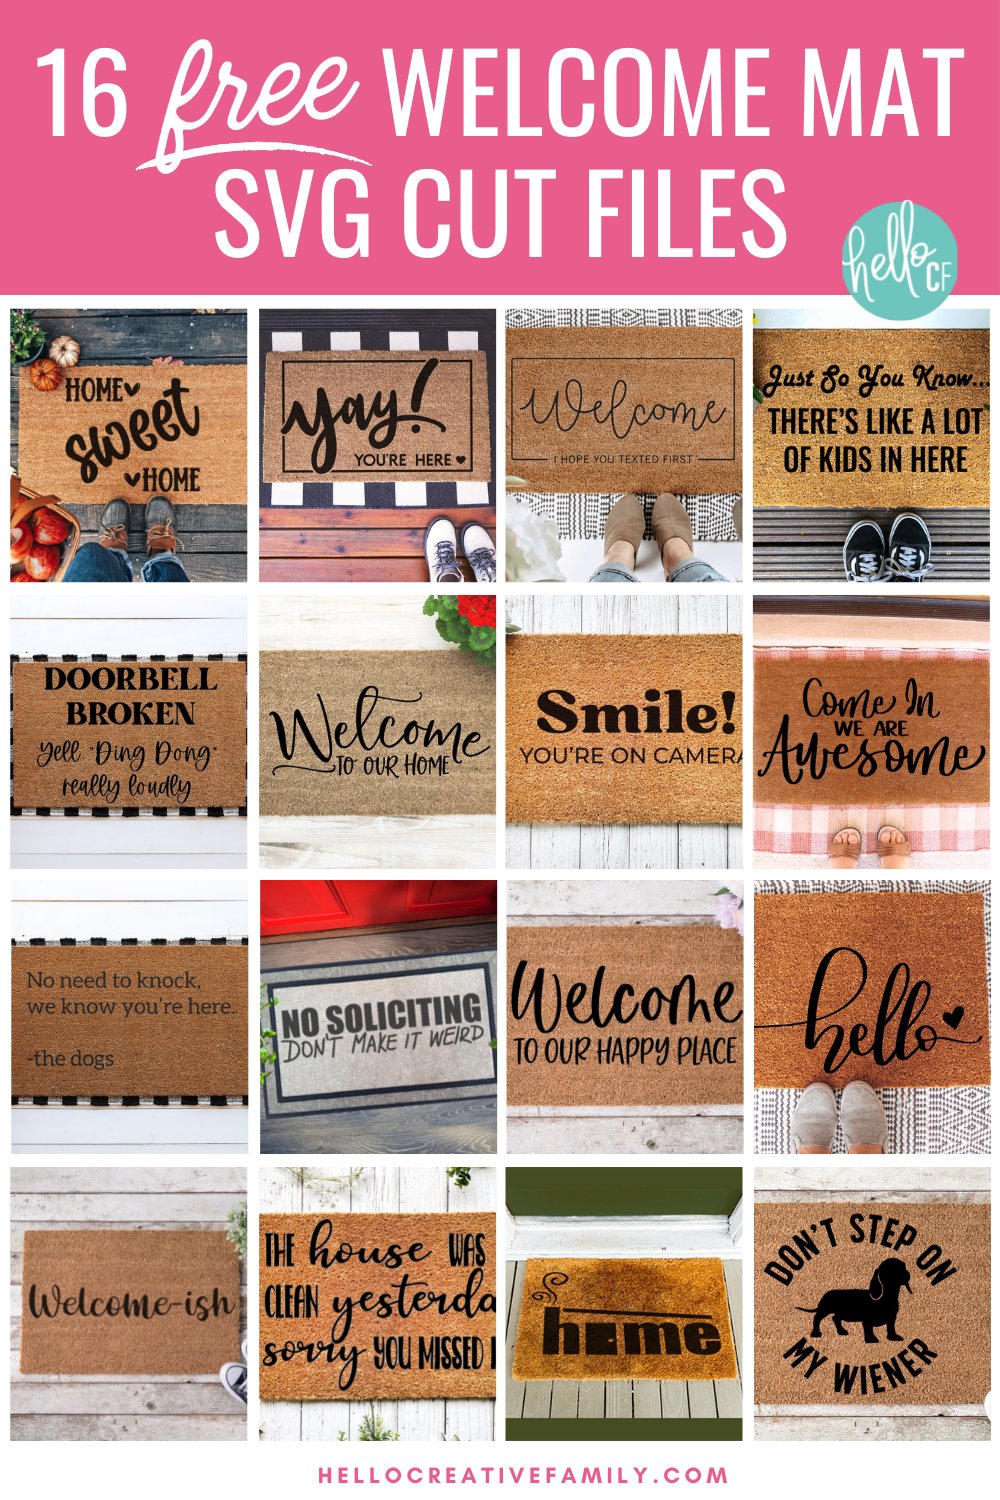 Welcome guests to your home with a DIY welcome mat that you made with your Cricut! We're sharing 16 free welcome svg files! From funny to sweet we've got you covered including a free Home Sweet Home SVG File. We're also sharing step by step instructions on how to make a door mat using your Cricut and freezer paper!